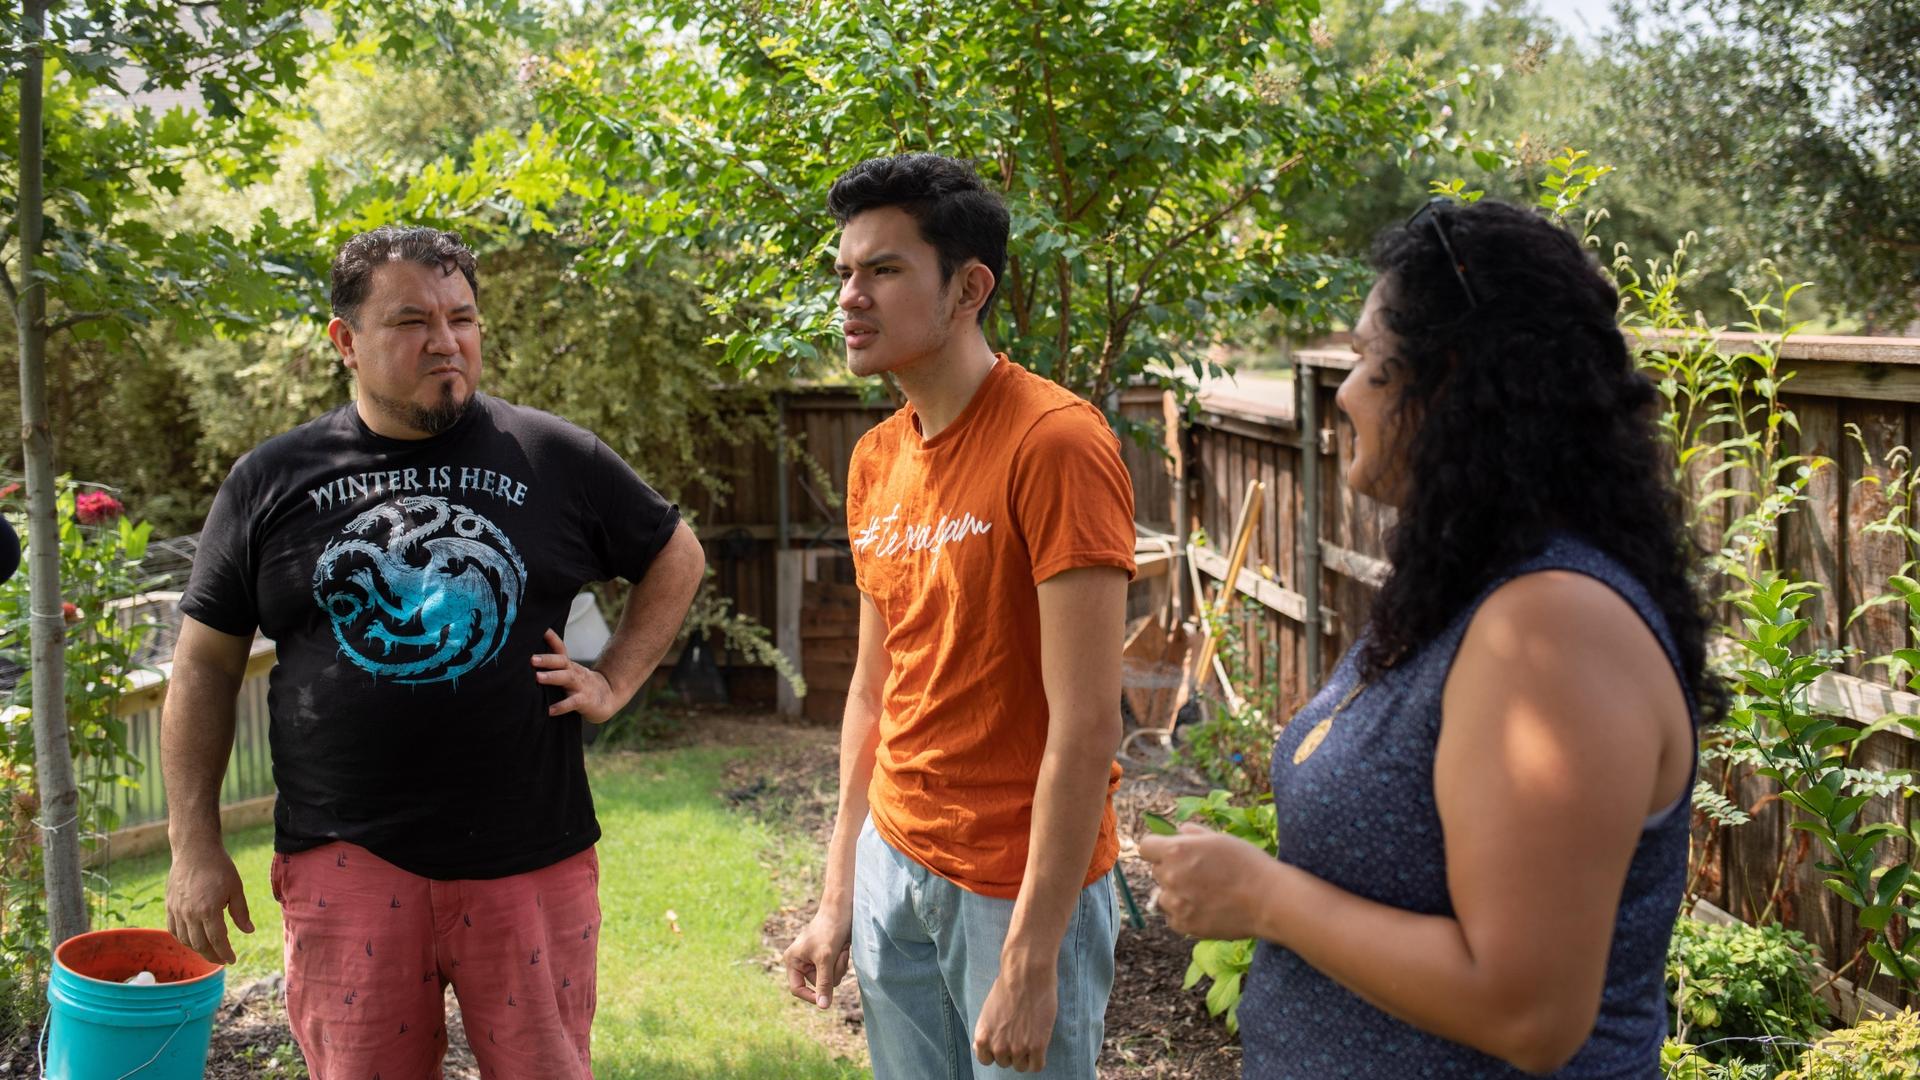 Izcan Ordaz, center, has been spending more time with his parents Simon Ordaz, left, and Xochitl Ortiz during the pandemic.